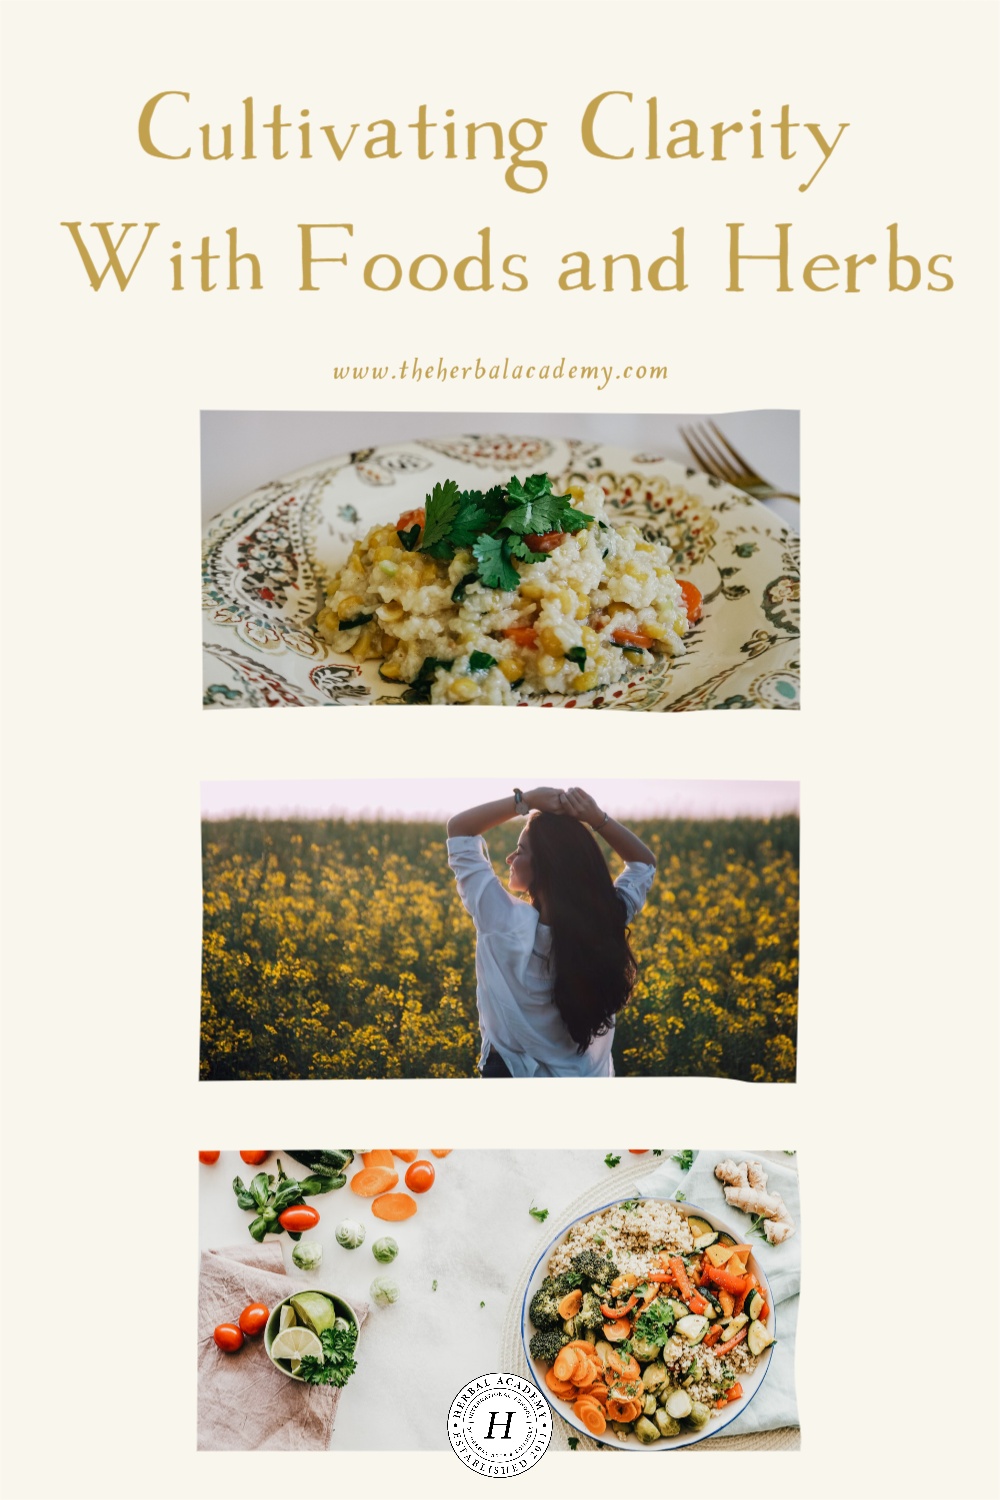 Cultivating Clarity With Foods and Herbs | Herbal Academy | Foods and herbs that are wholesome and refreshing can serve in leading a lifestyle that emphasizes truth, clarity, and luminosity.